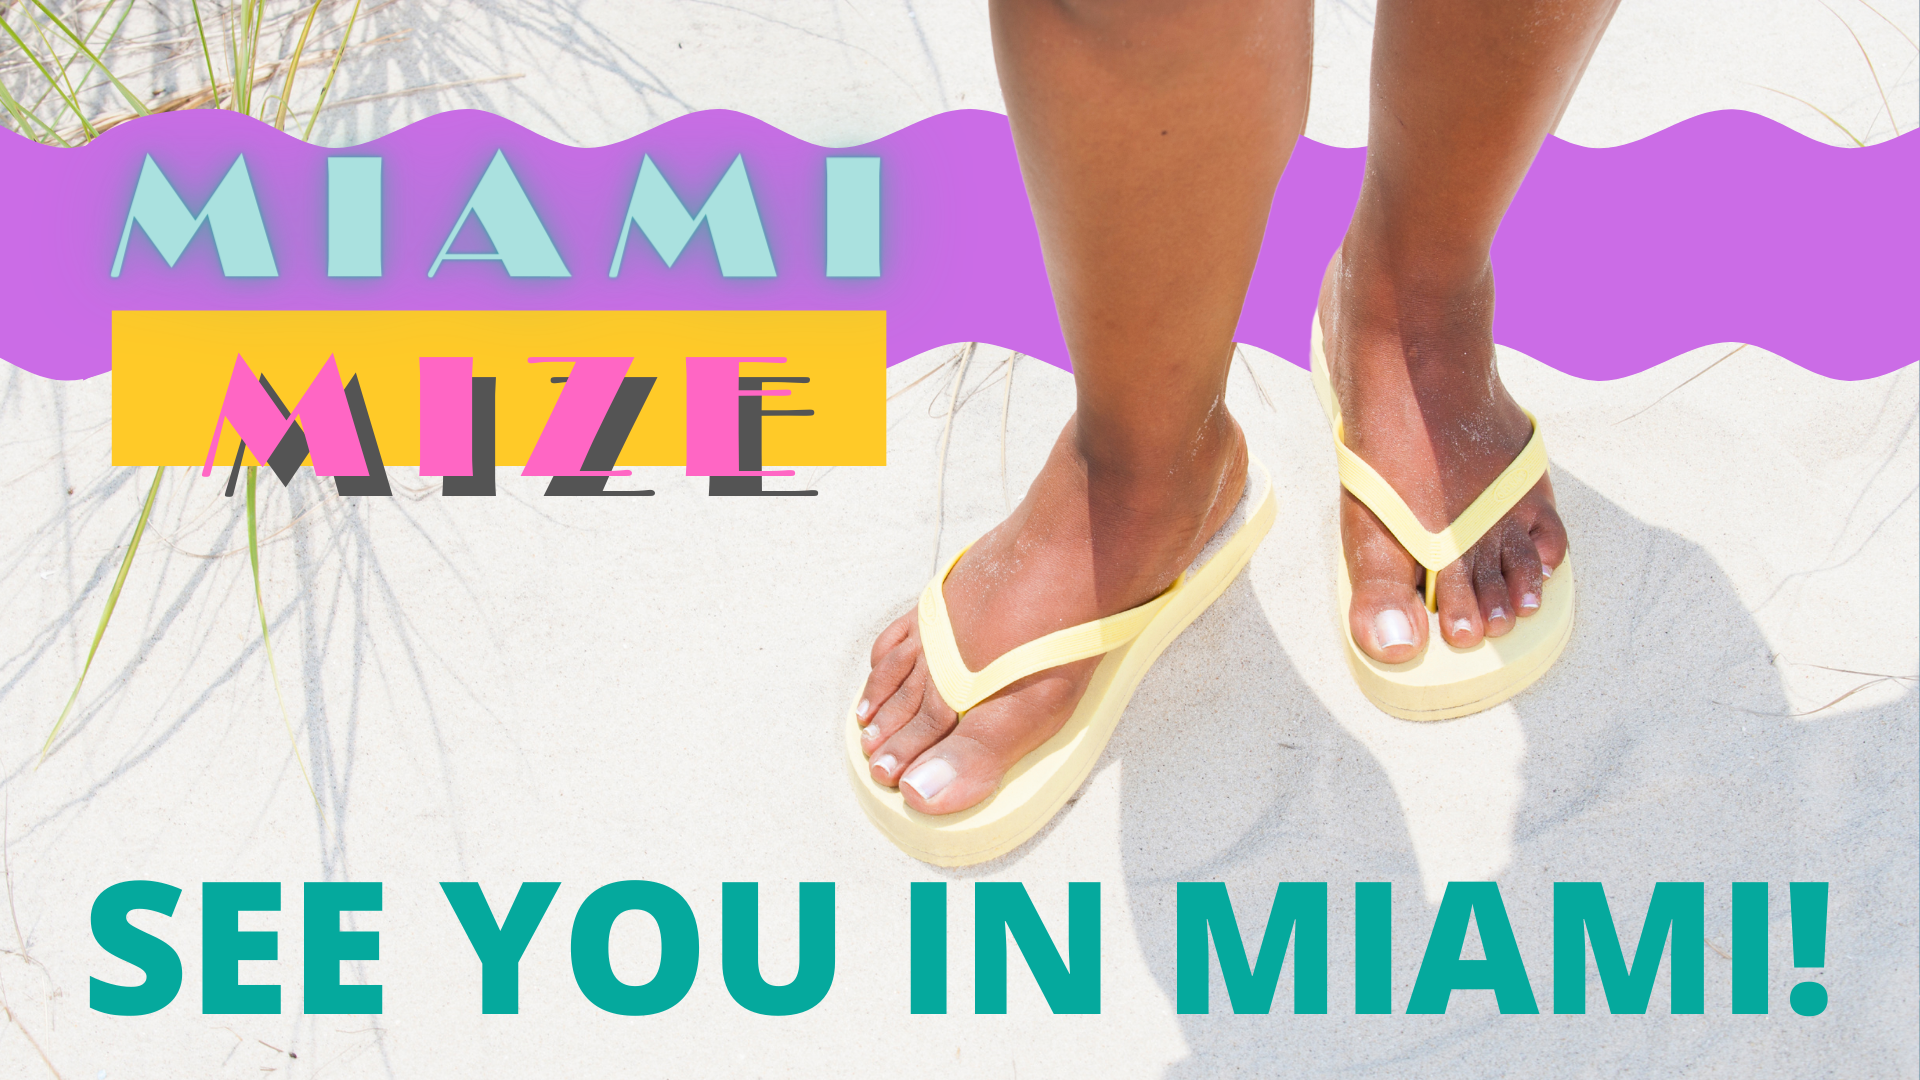 Miami Mize - See you in Miami for the Mize Finance Meeting